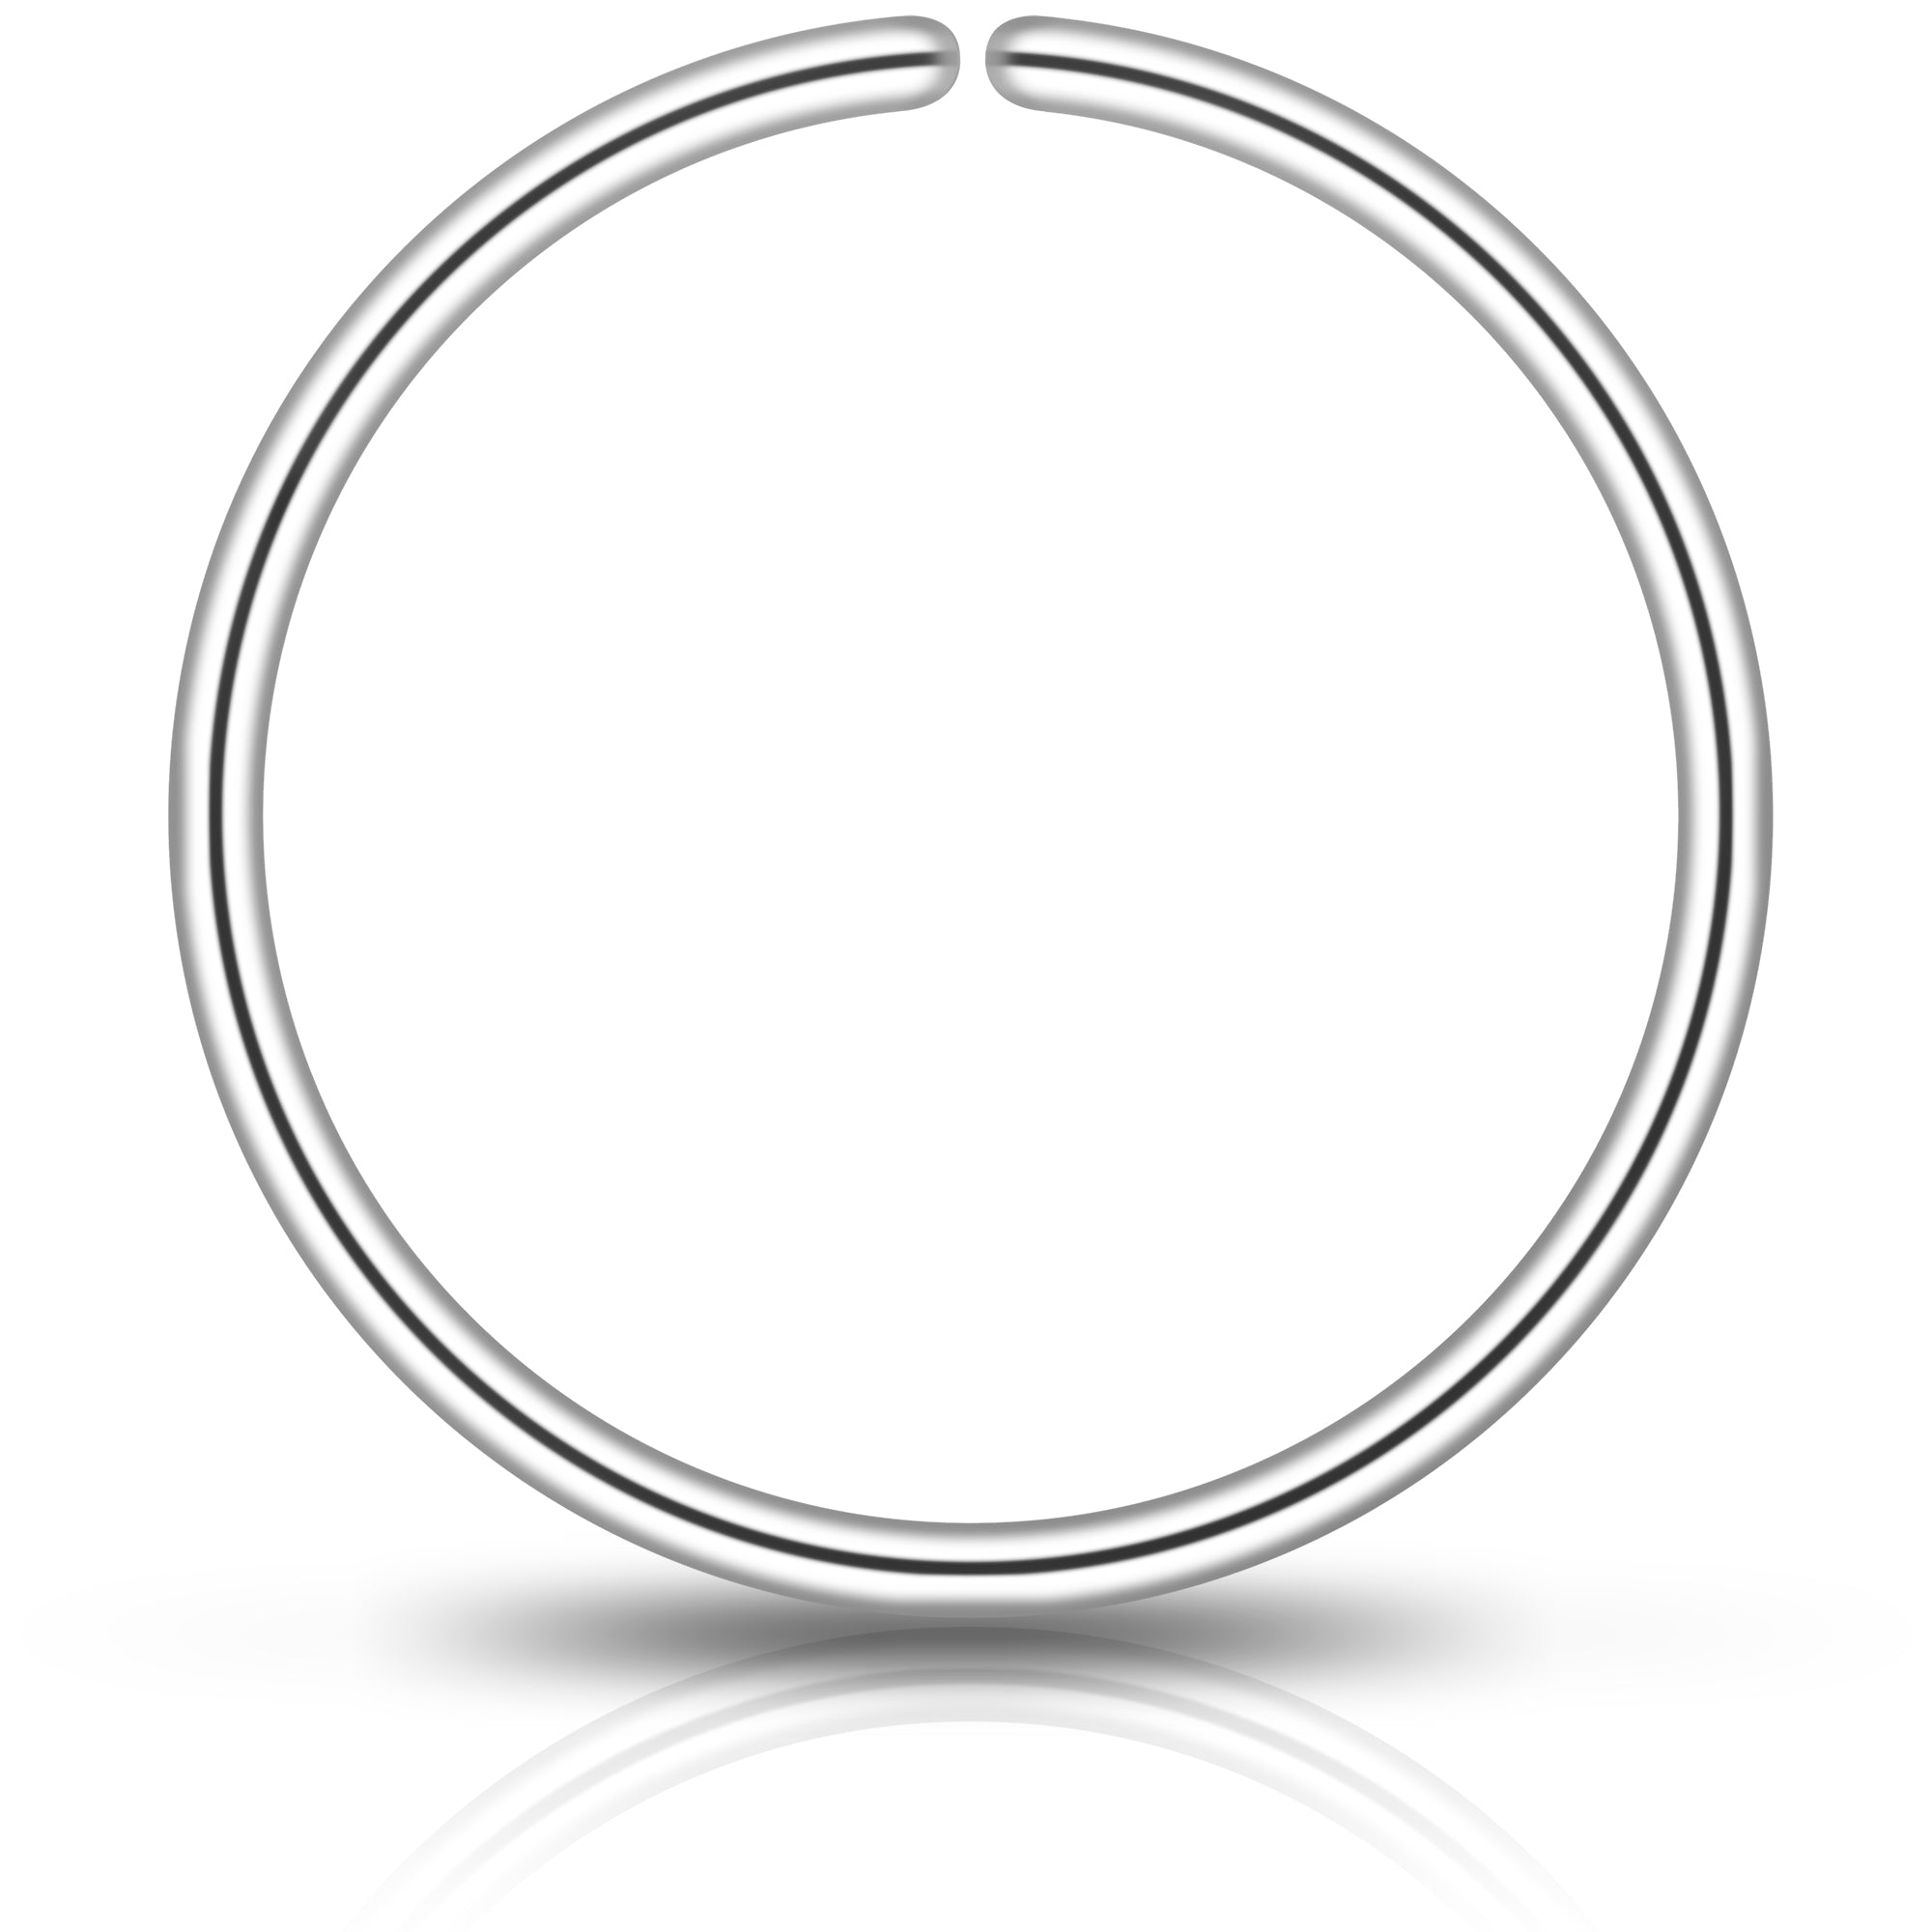 Single Hoop Nose 925 Sterling Silver Nose Hoop Ring (Select Your Size)